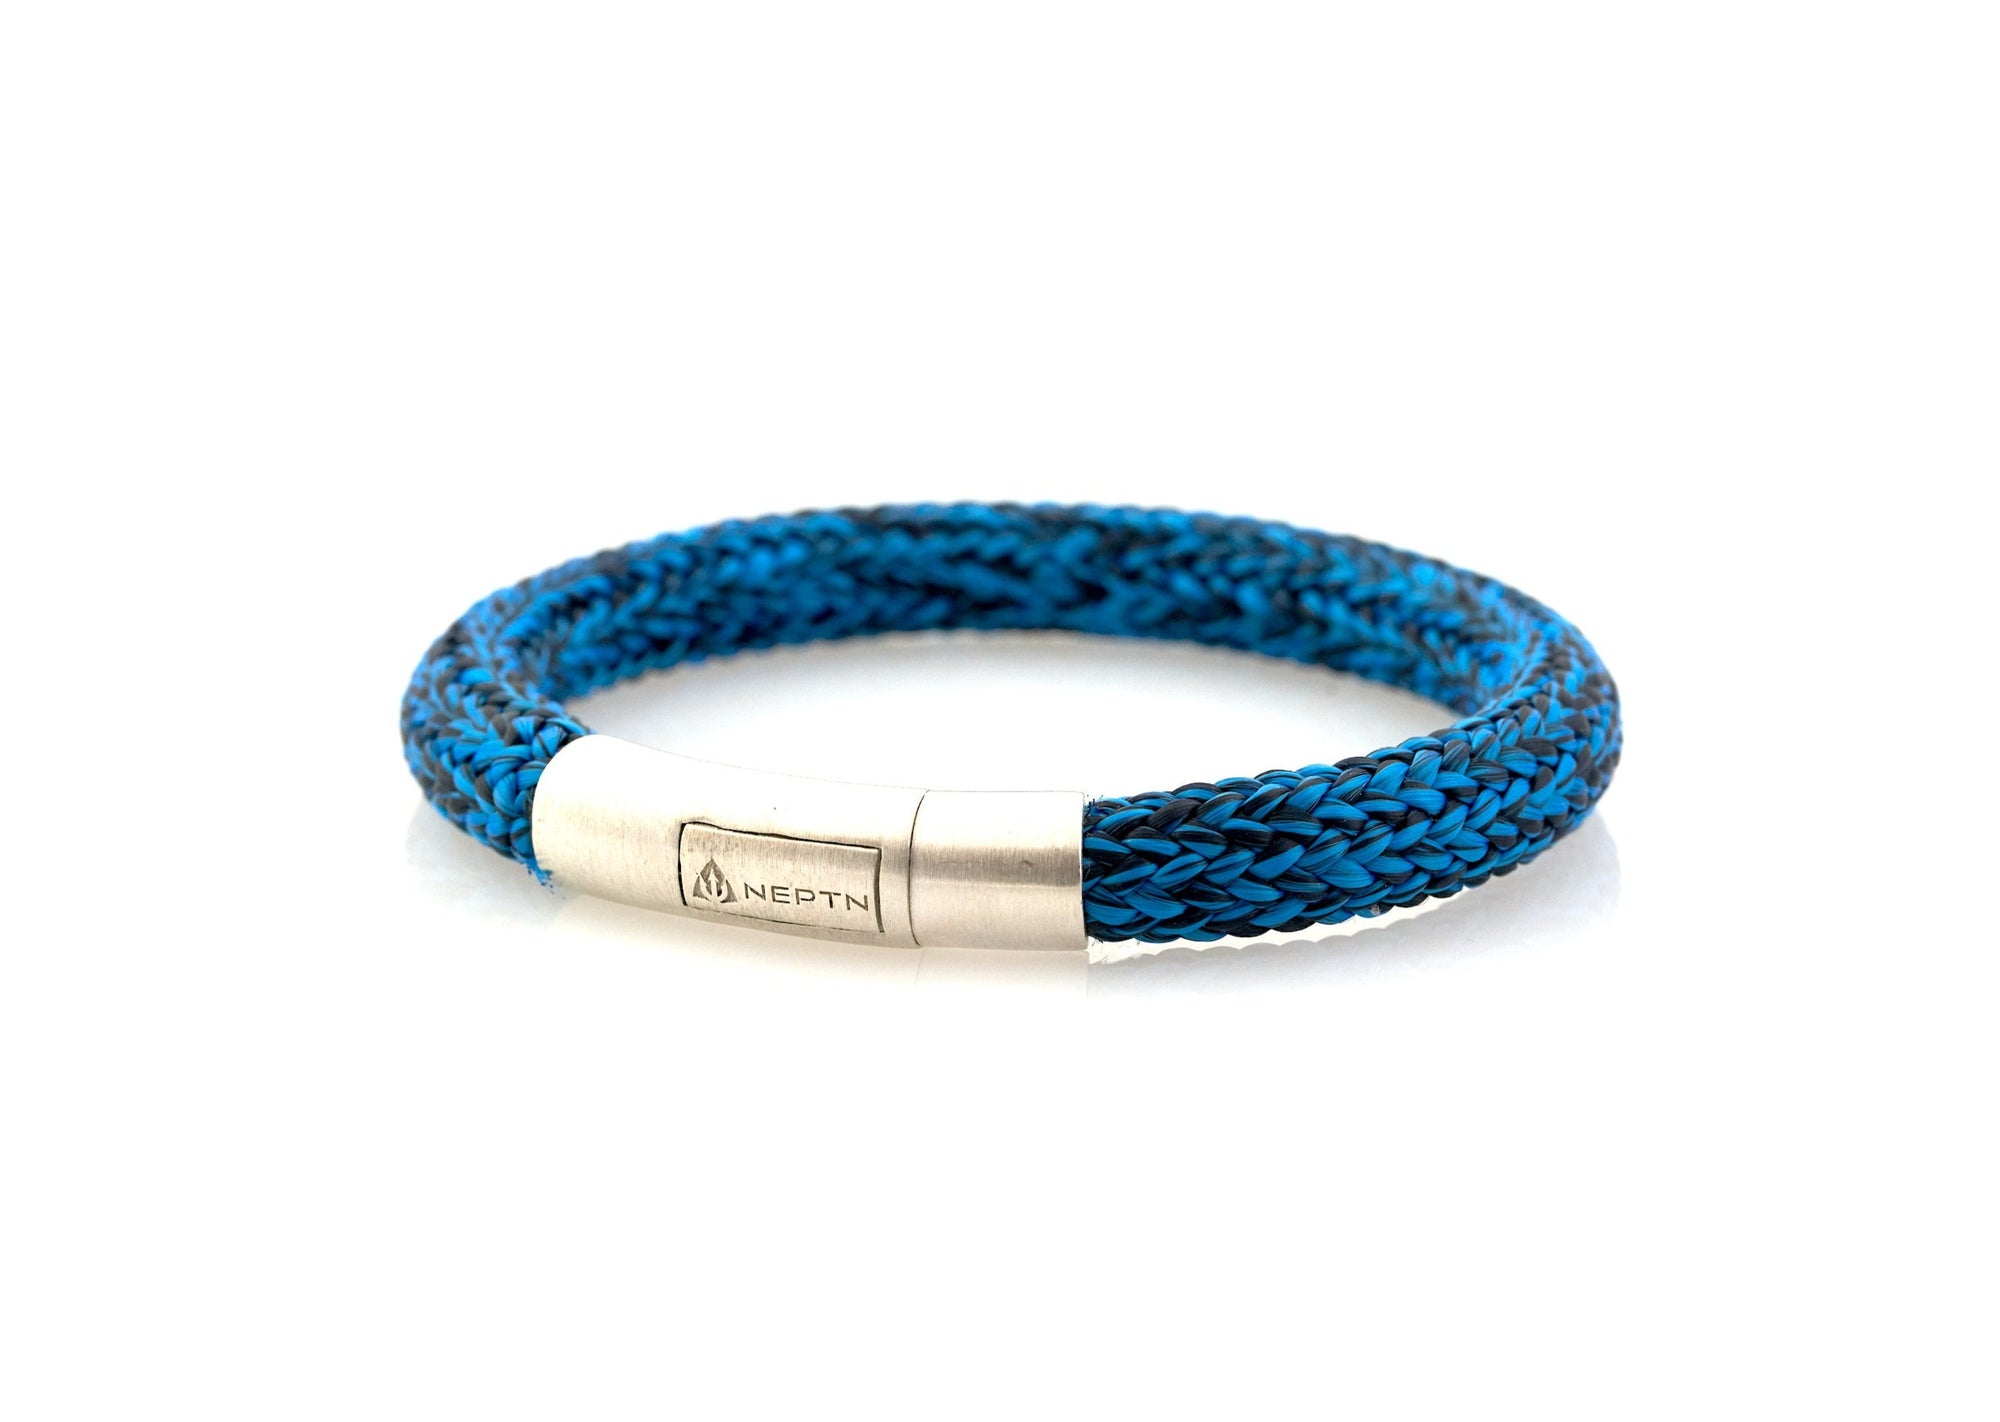 neptn sailor bracelet royal blue and navy rope with silver 925 clasp and neptn logo engraving